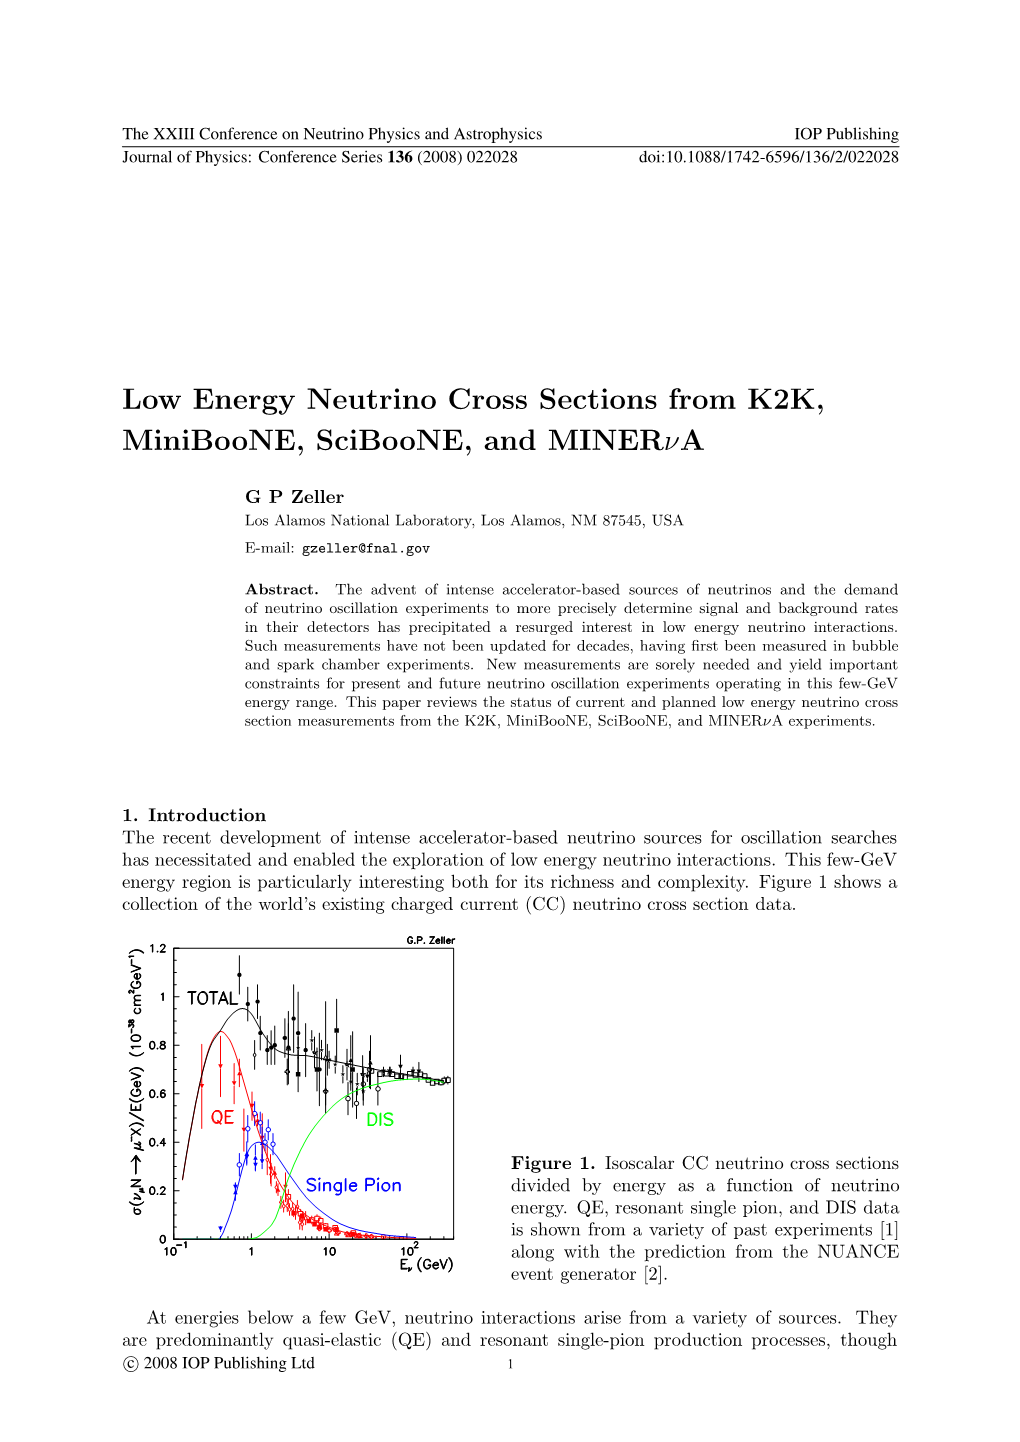 Low Energy Neutrino Cross Sections from K2K, Miniboone, Sciboone, and Minerνa